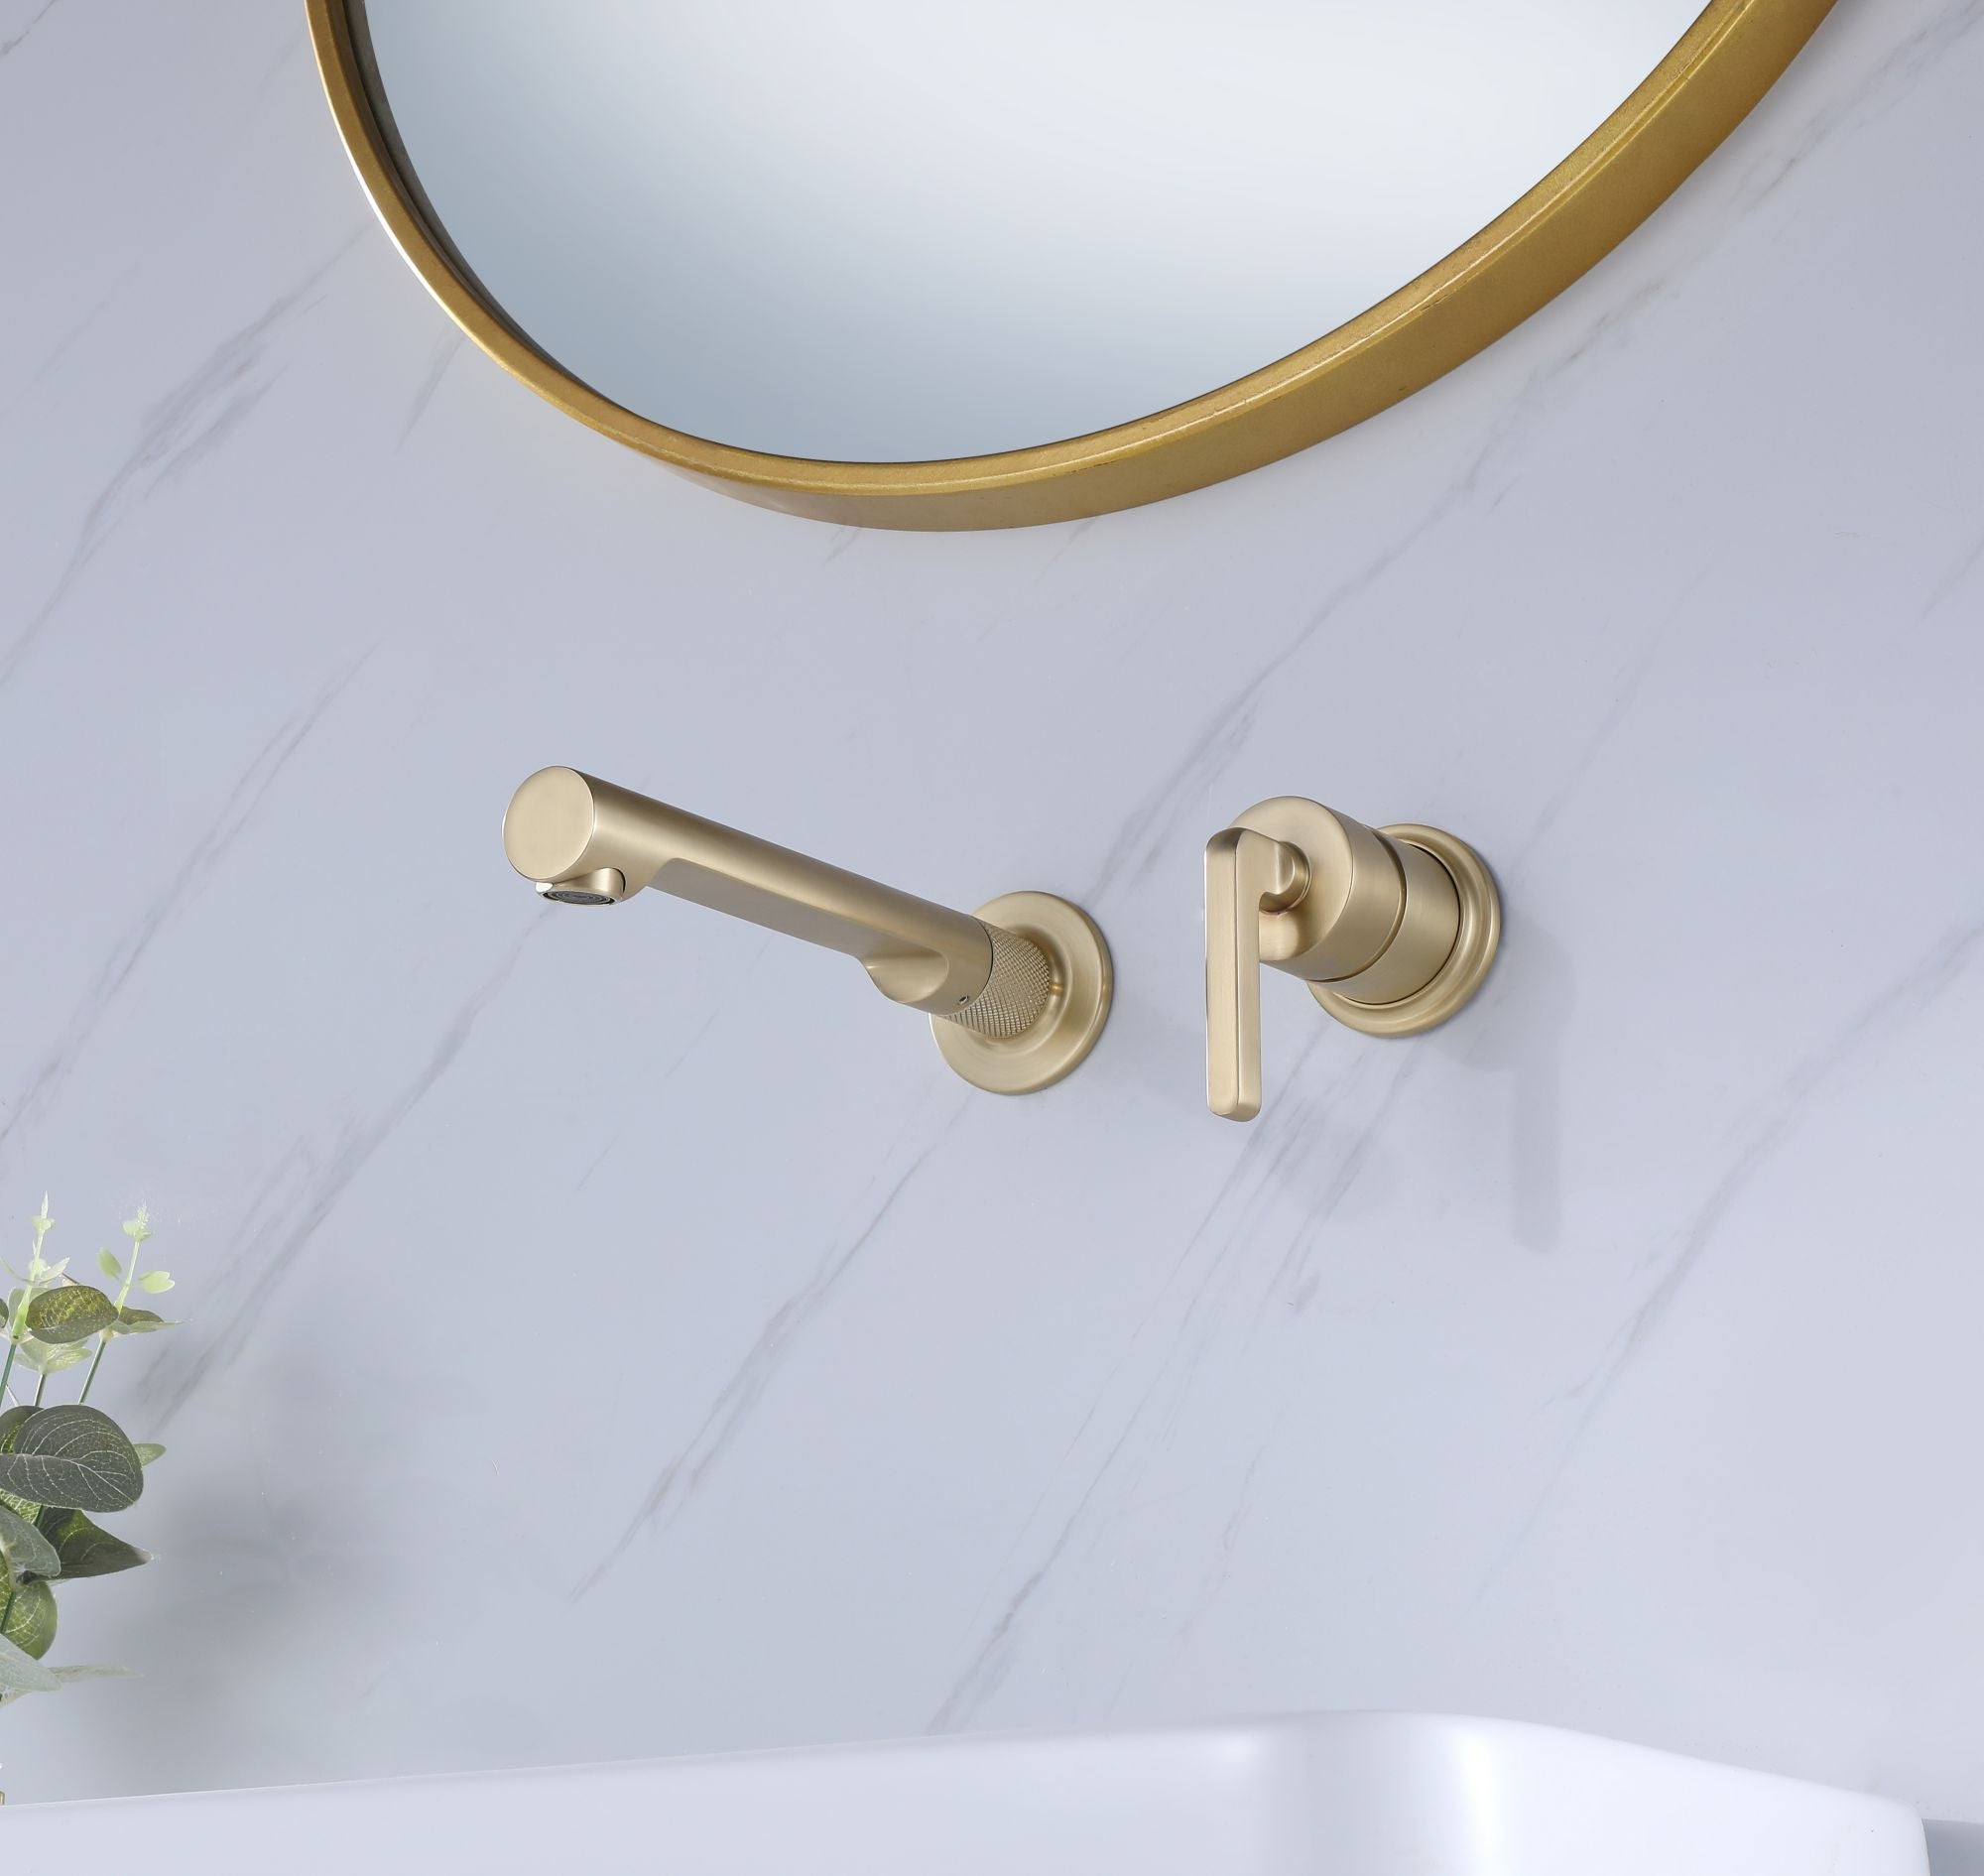 Wall Mounted Bathroom Sink Faucet With Valve